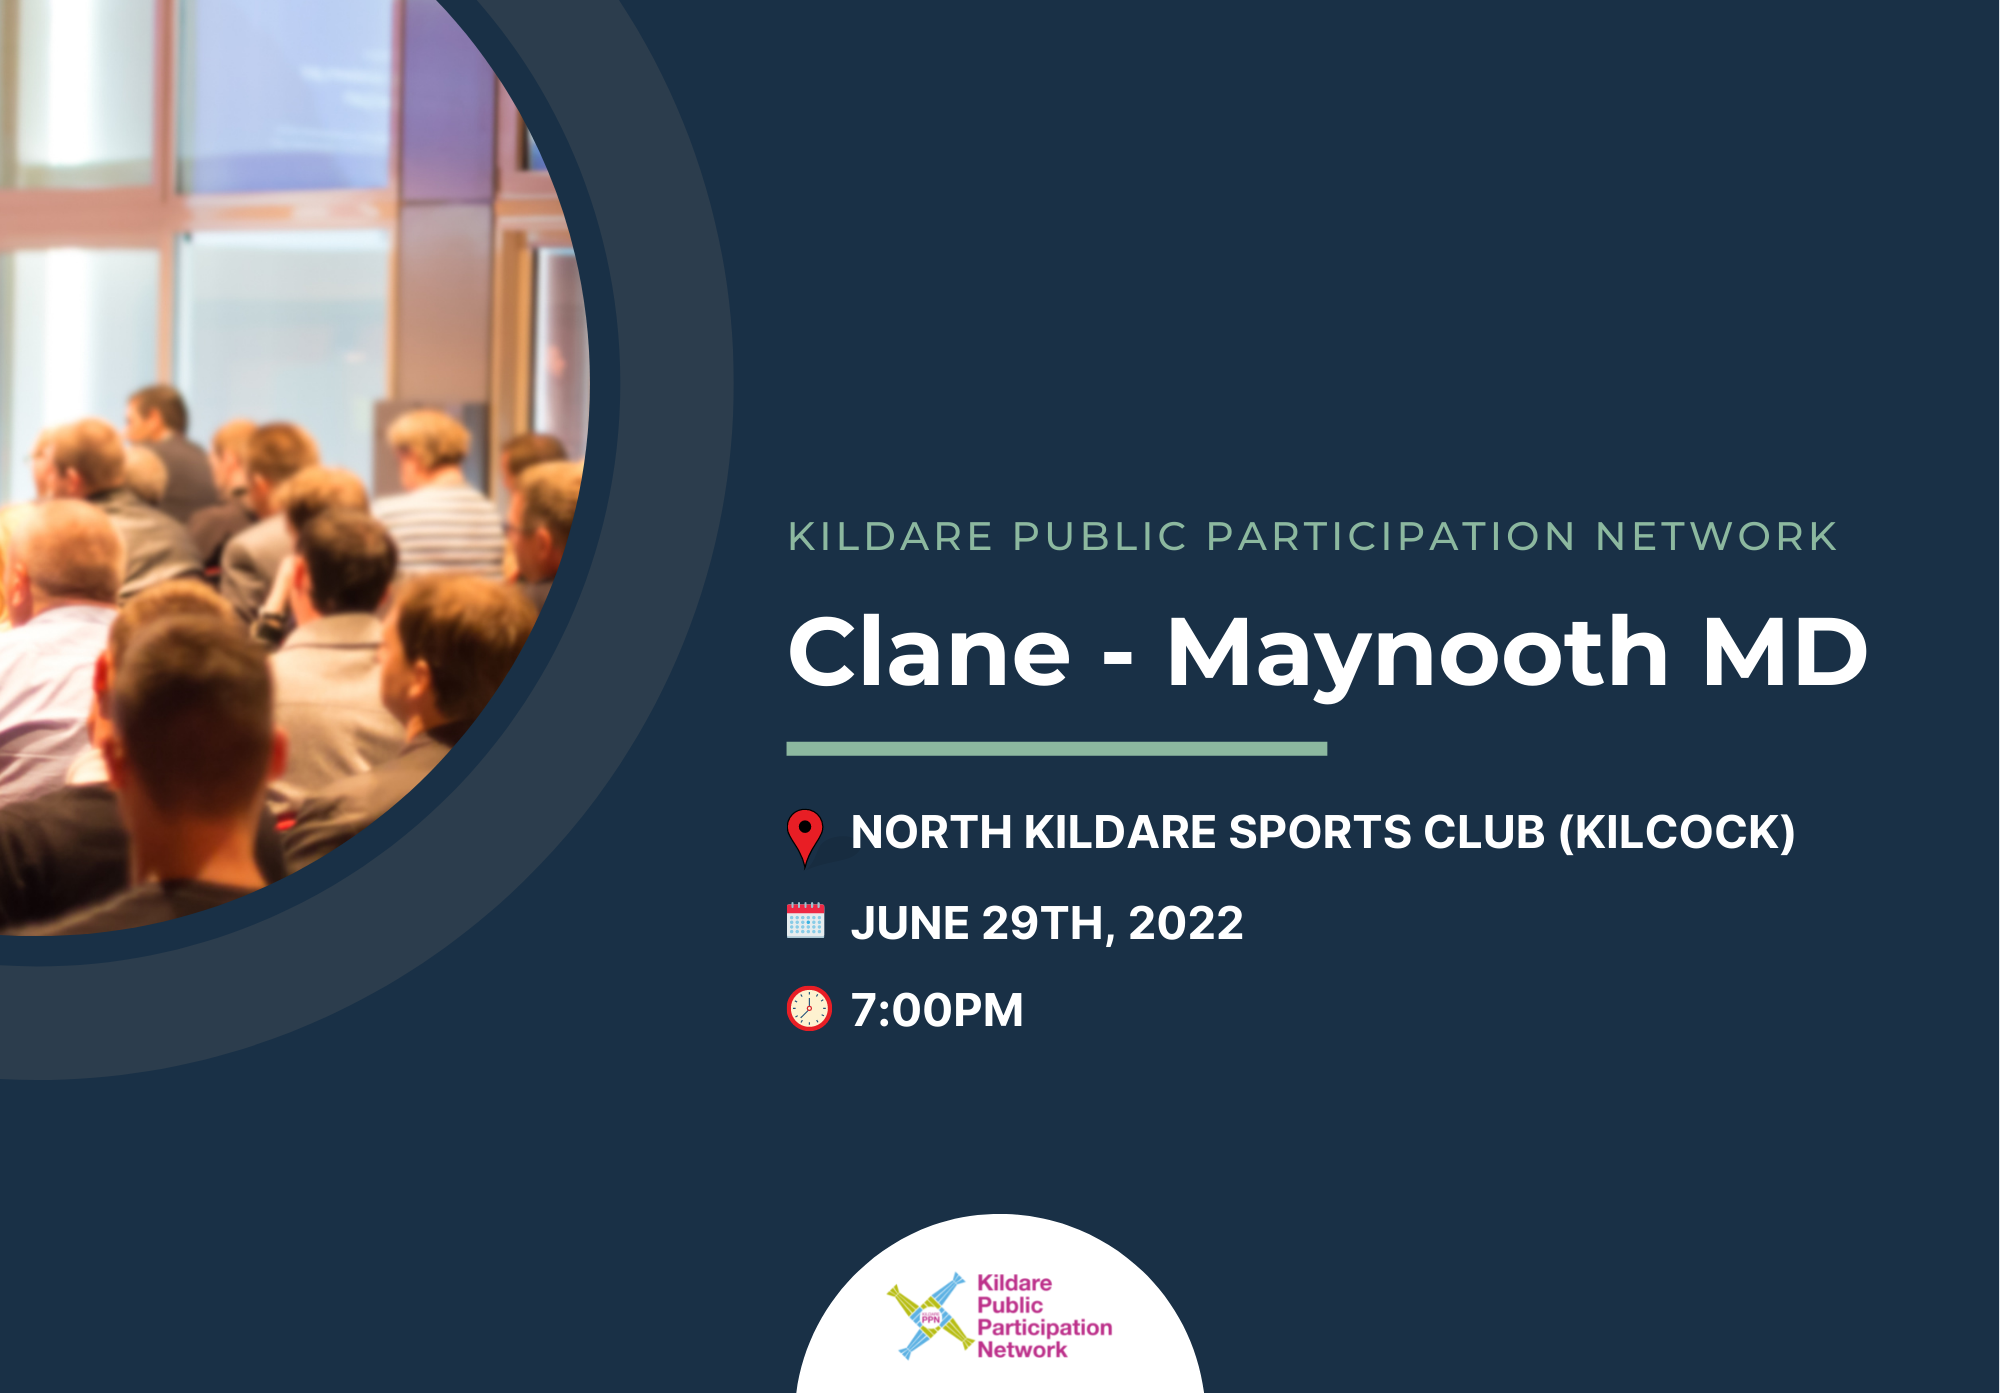 Kildare PPN Meeting for Clane – Maynooth Municipal District